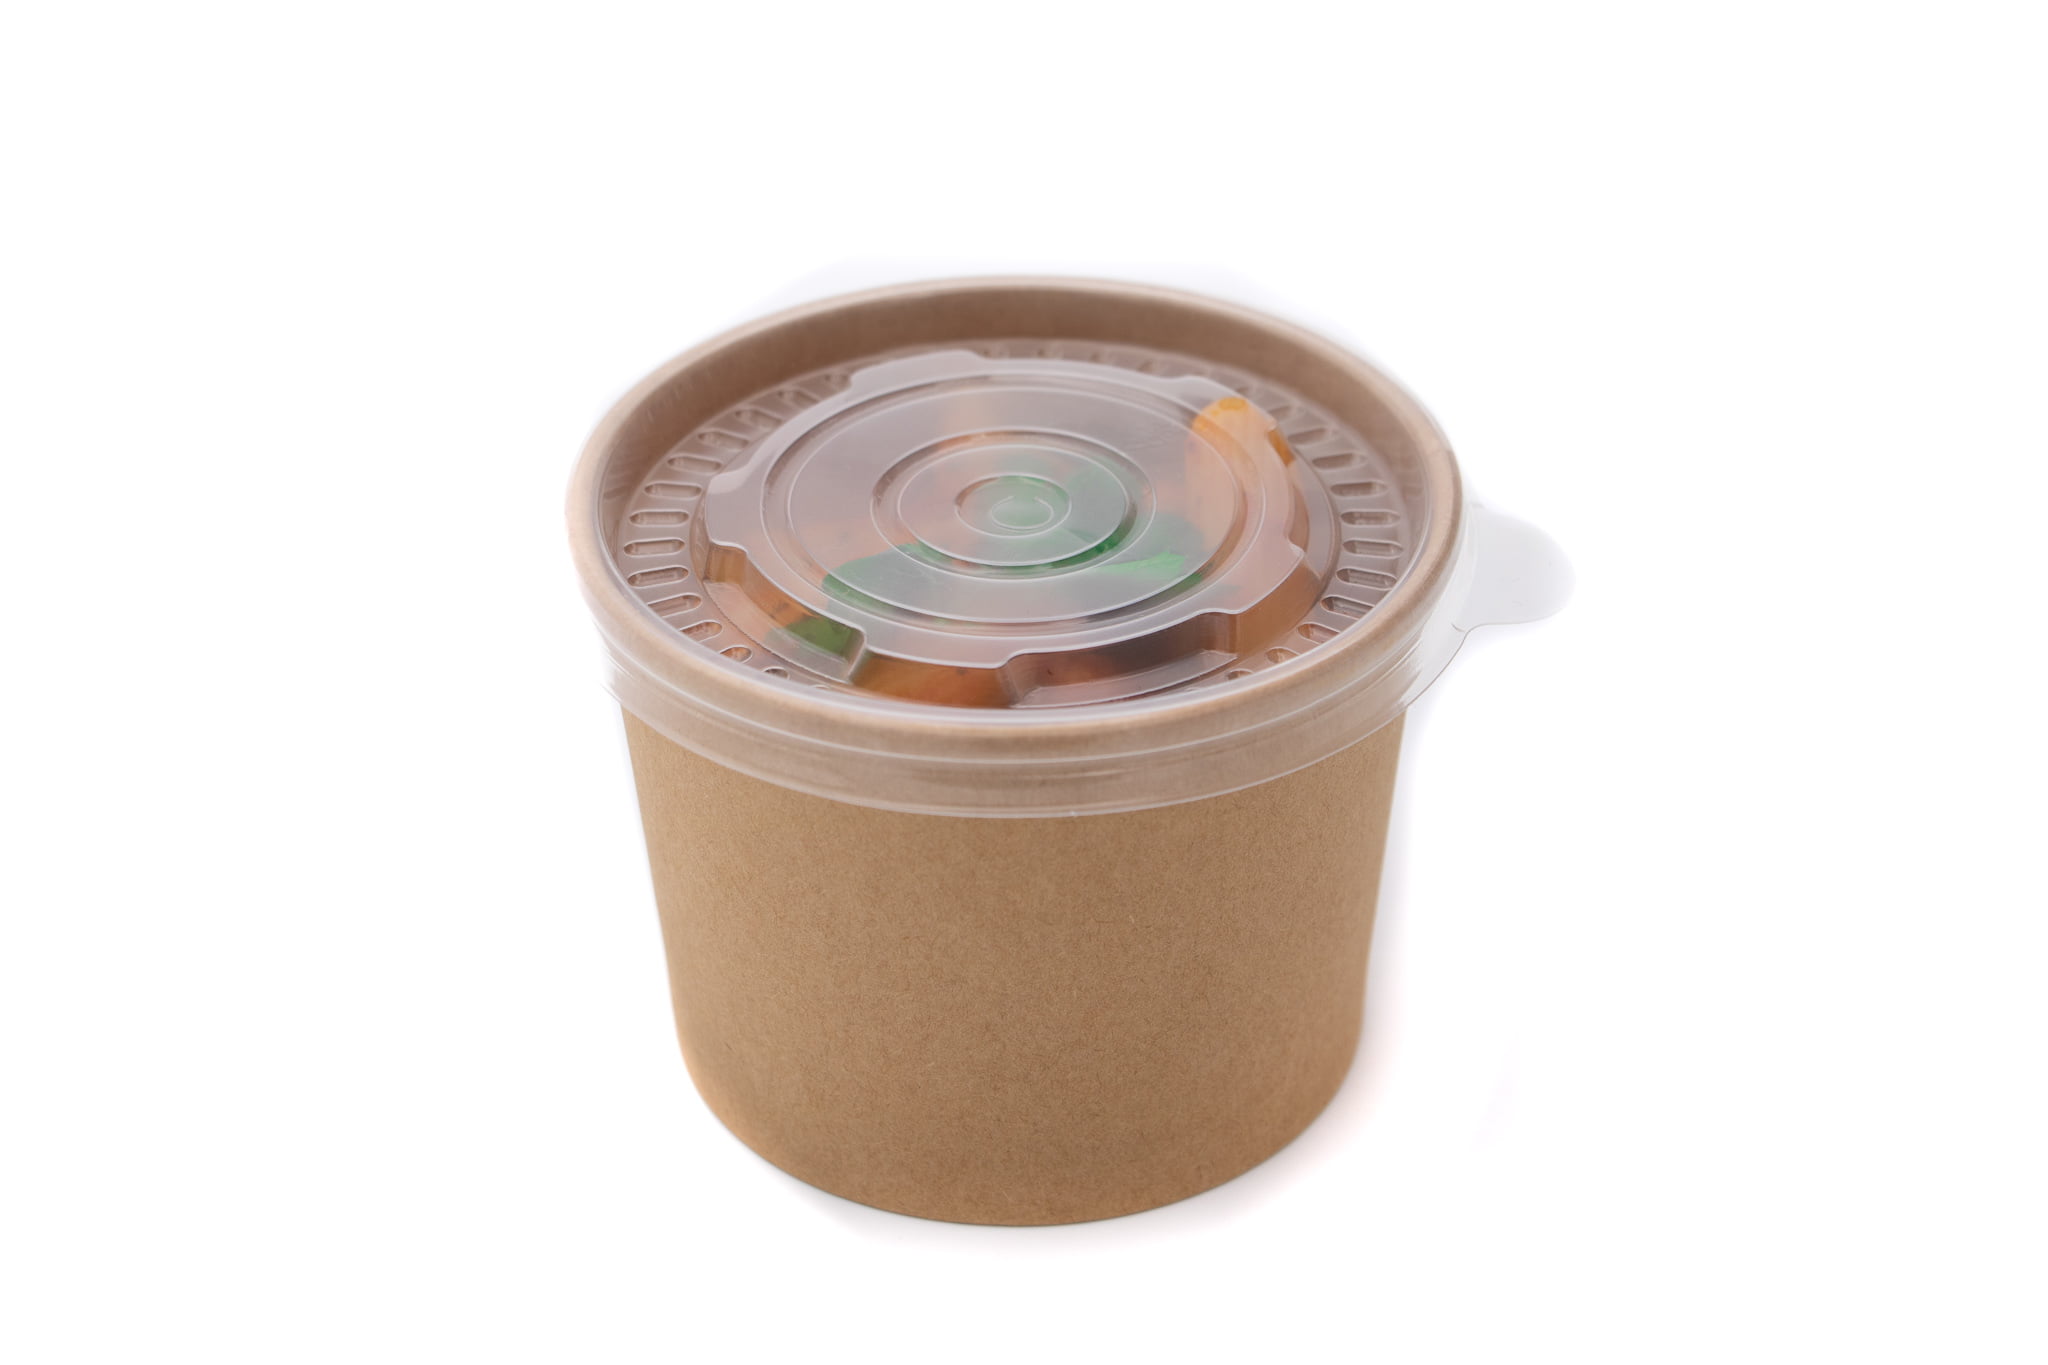  Smygoods 12oz Paper Soup Containers With Lids